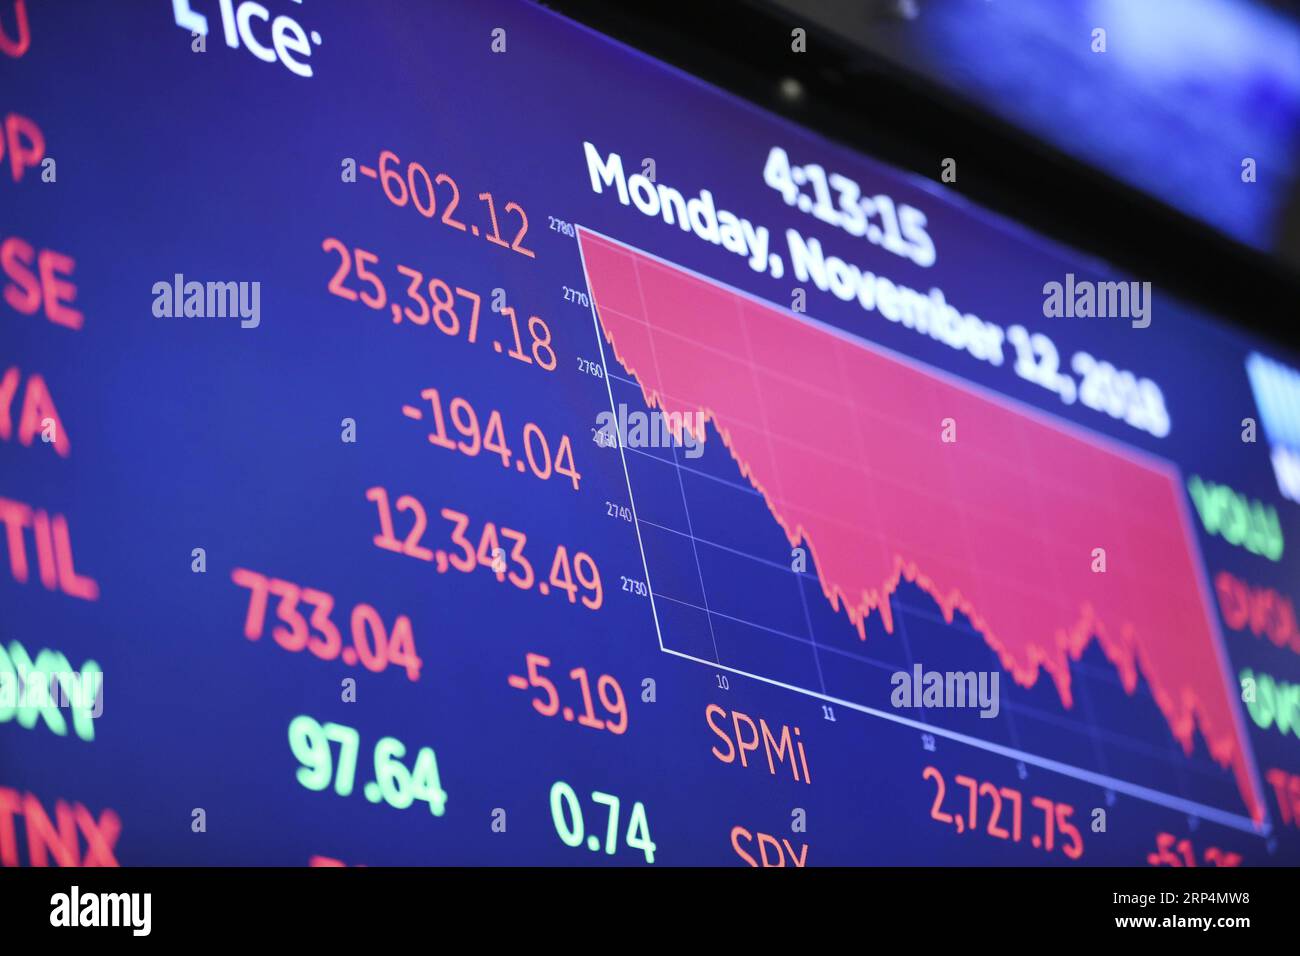 (181113) -- NEW YORK, Nov. 13, 2018 -- Electronic screen shows the closing numbers of stock market at the New York Stock Exchange in New York, the United States, Nov. 12, 2018. U.S. stocks closed sharply lower on Monday, as steep losses in Apple shares led the tech rout, dragging the market. The Dow Jones Industrial Average slumped 602.12 points, or 2.32 percent, to 25,387.18. ) (jmmn) U.S.-NEW YORK-STOCKS WangxYing PUBLICATIONxNOTxINxCHN Stock Photo